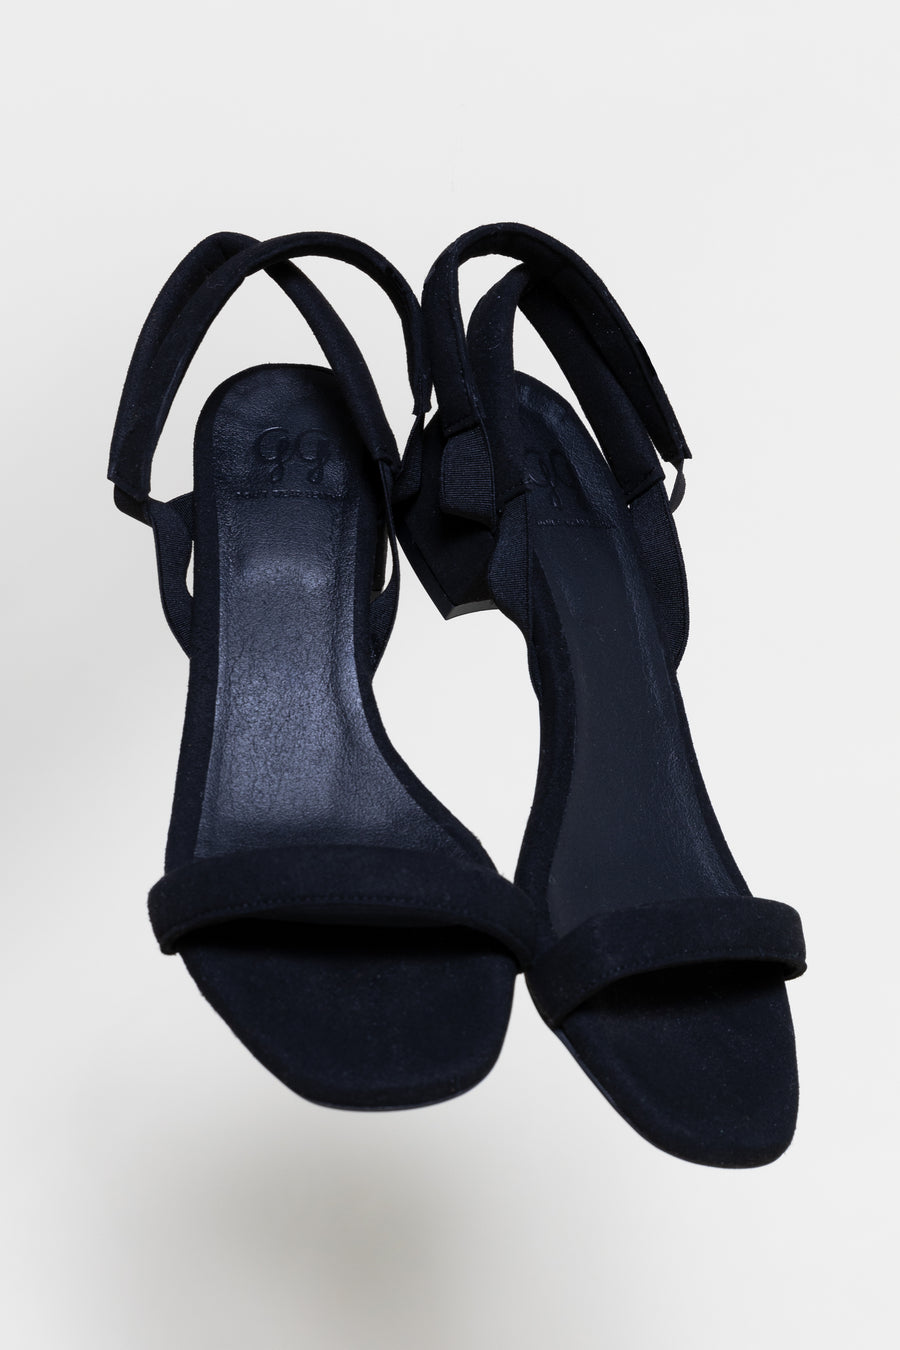 MARY Black sandals| warehouse sale